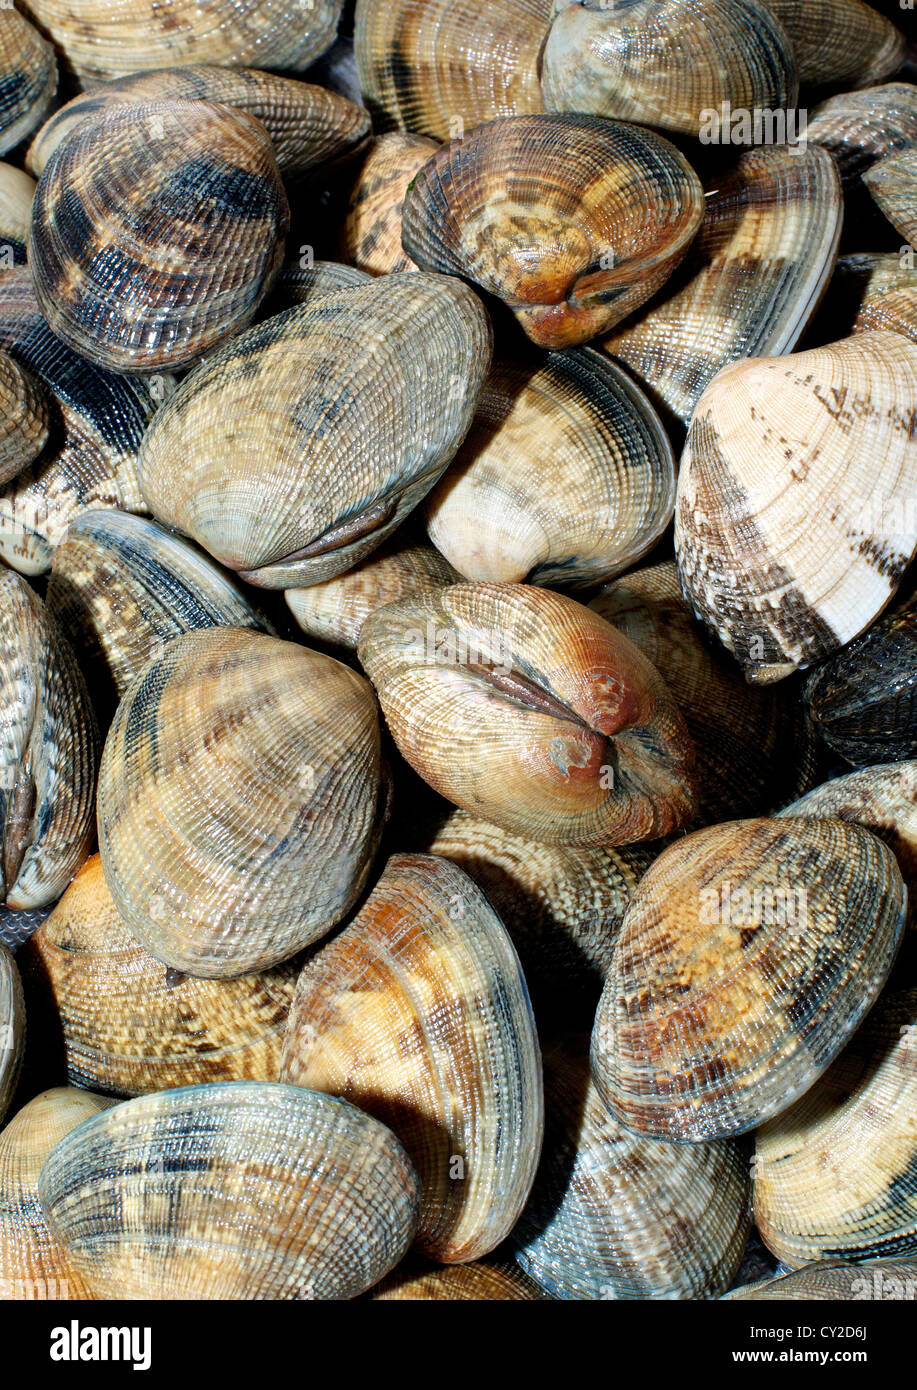 Clams Close-up, for spaghetti vongole Stock Photo